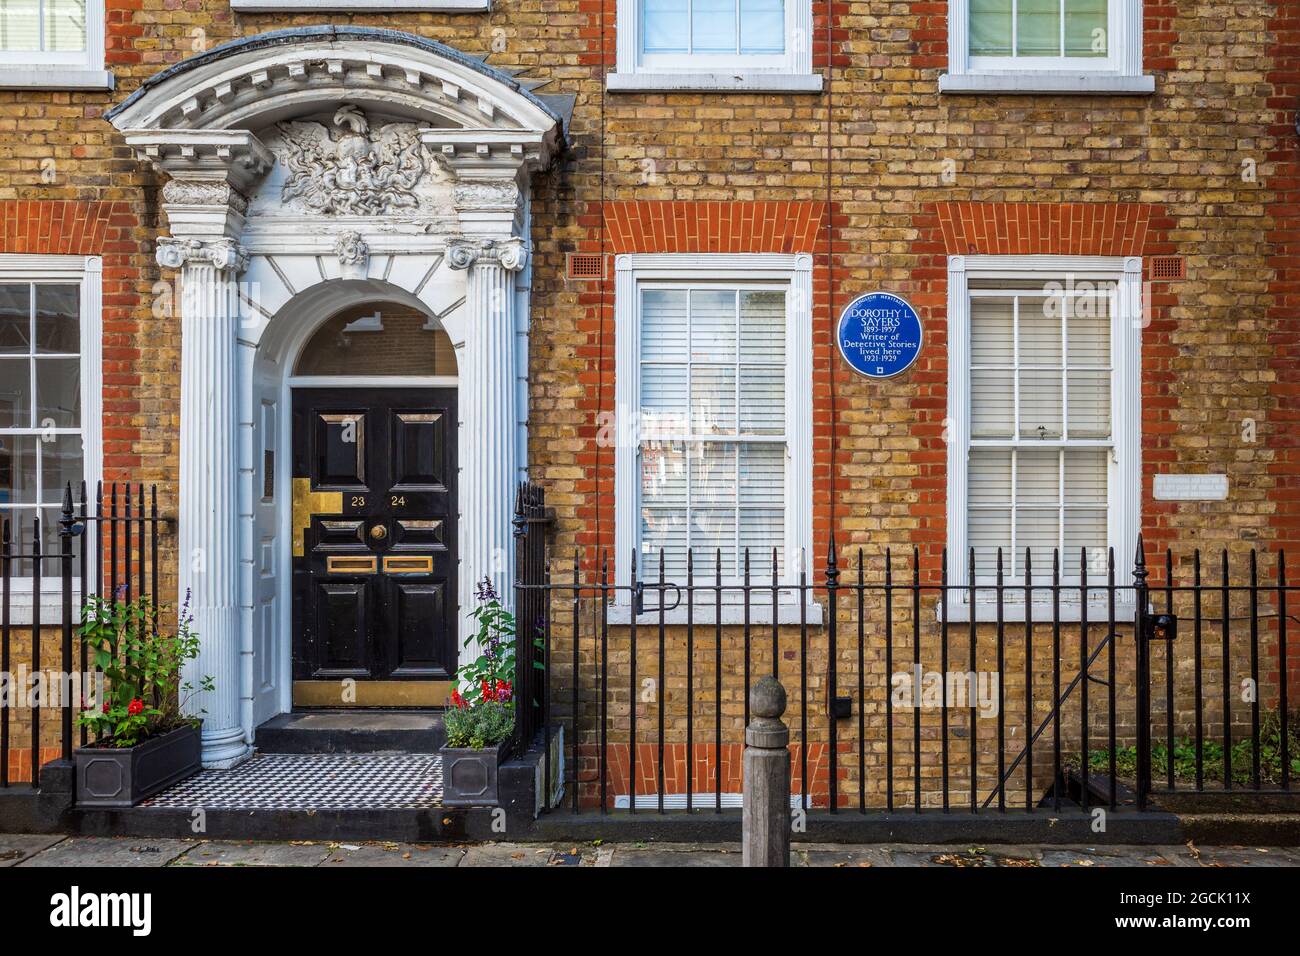 Dorothy L Sayers House (1893 - 1957), author of detective fiction, lived at 24 Great James Street 1921 - 1929. London Plaque 2000 by English Heritage Stock Photo